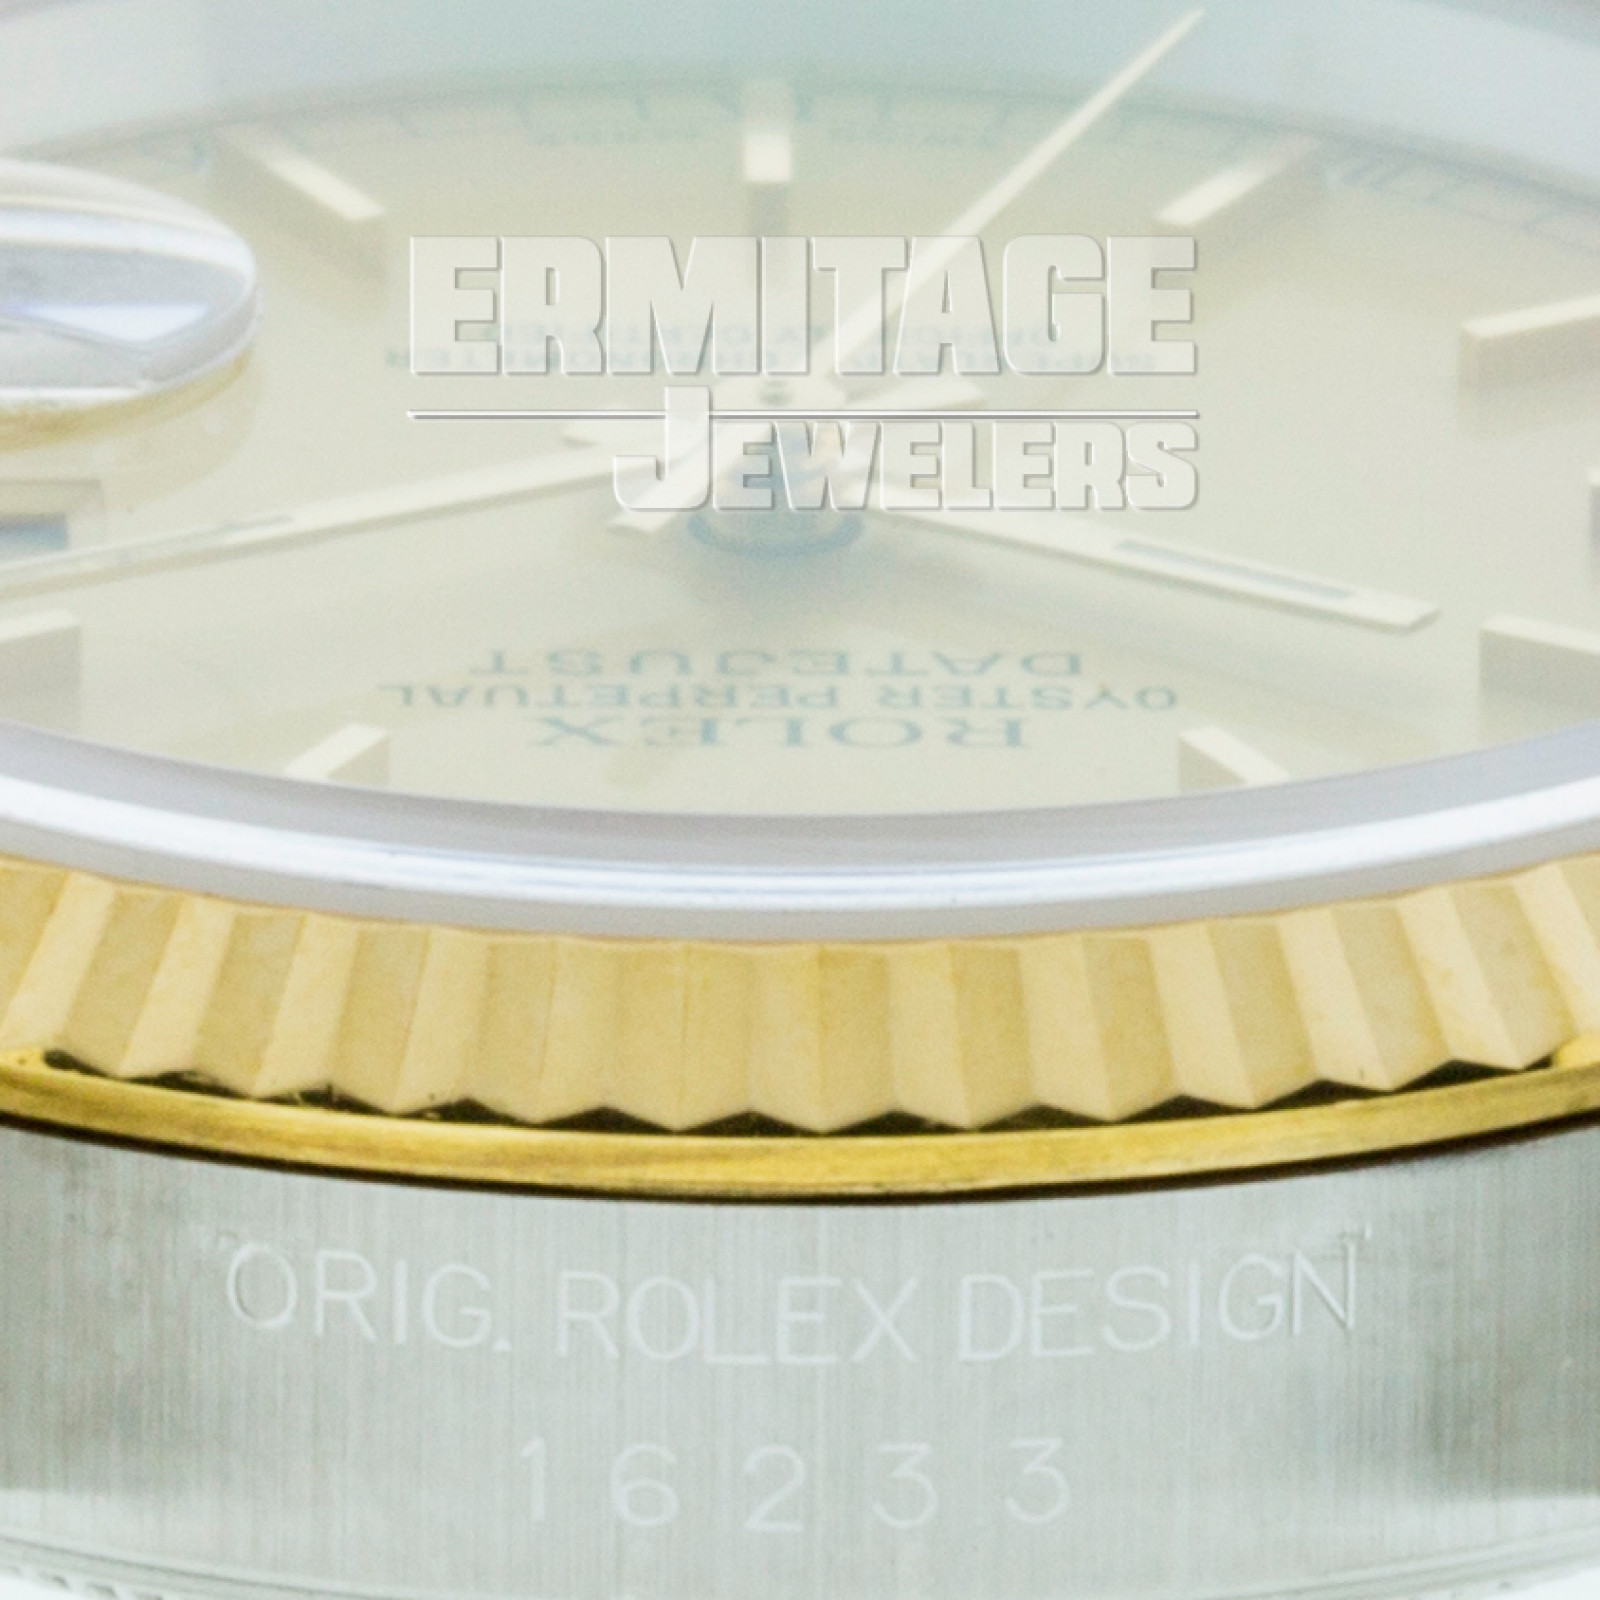 Rolex Datejust 16233 36 mm with Champagne Dial